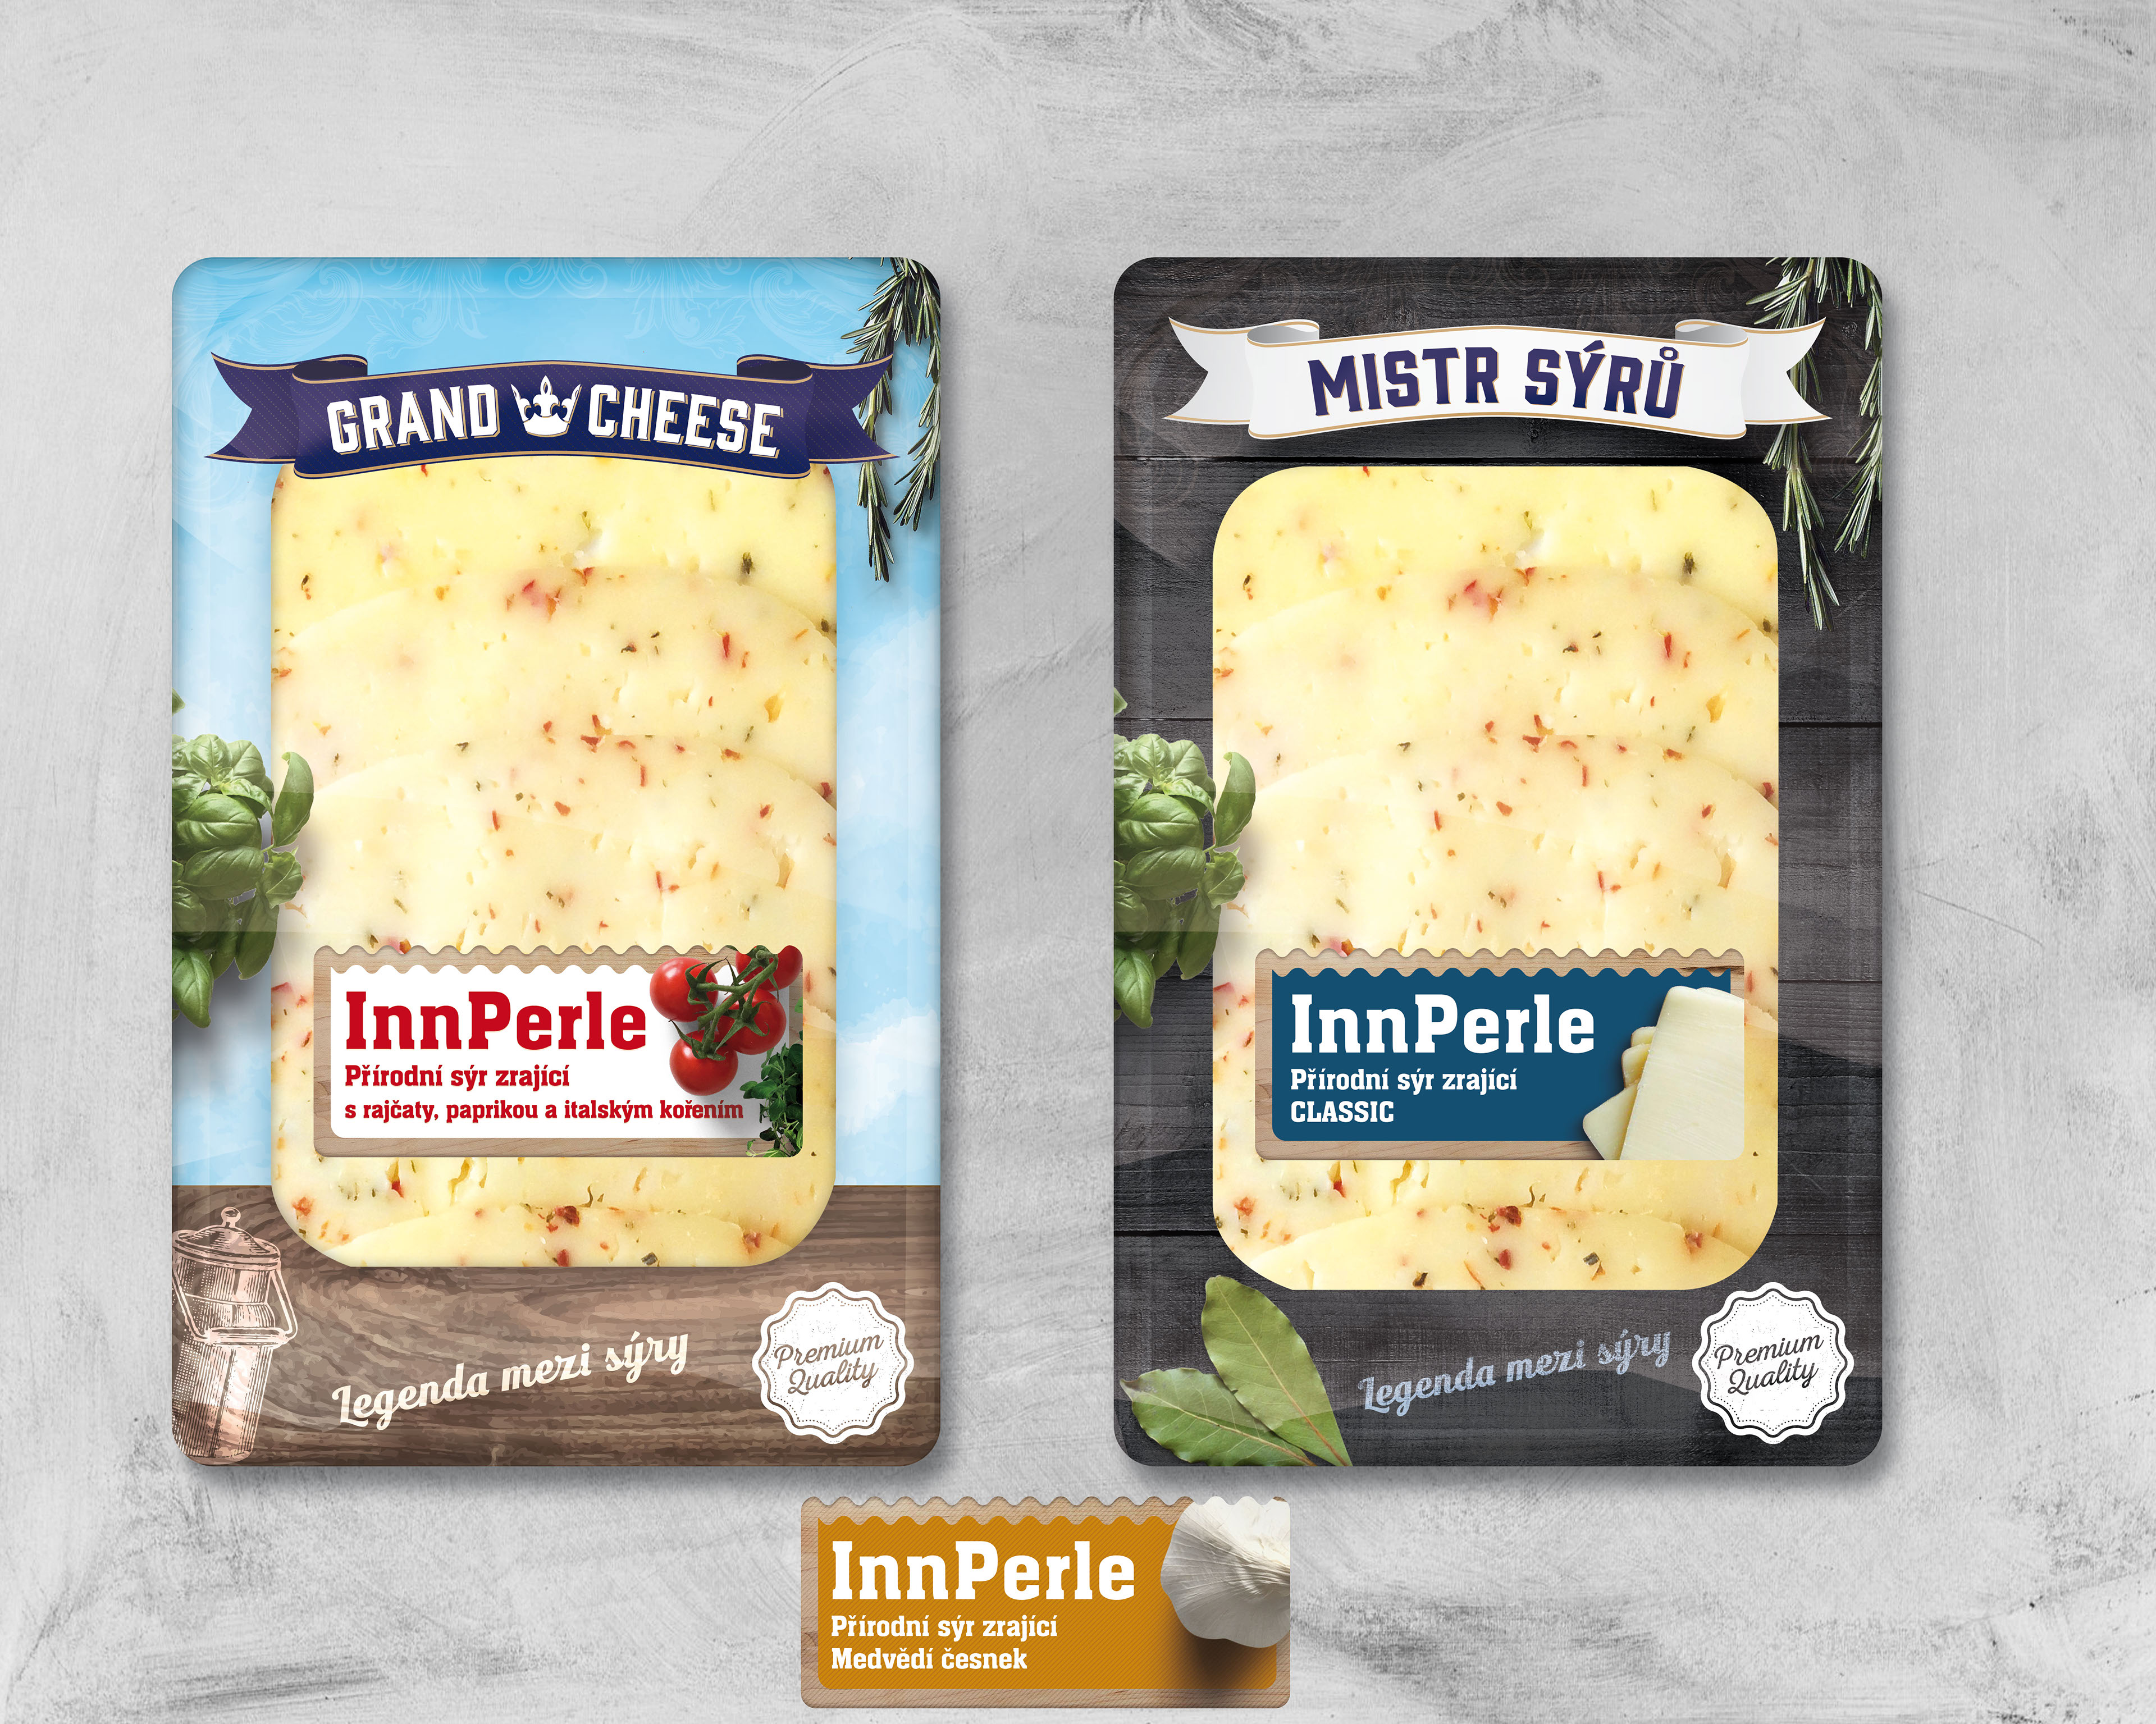 Packaging for New Cheese Brand